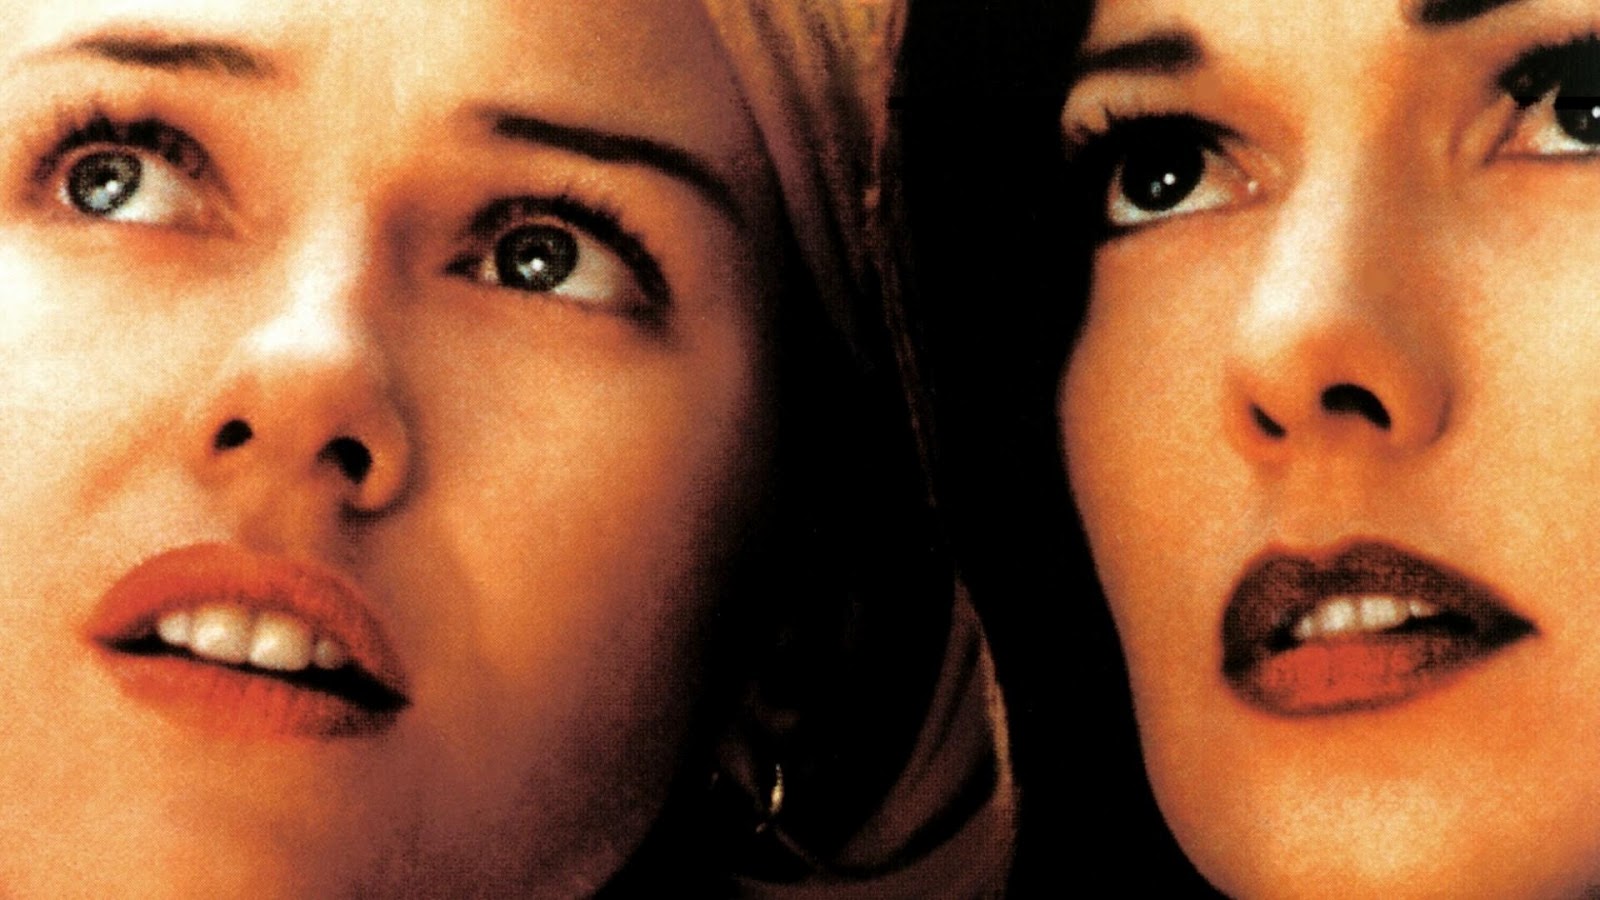 Mulholland Drive 2001 - Trailer - YouTube